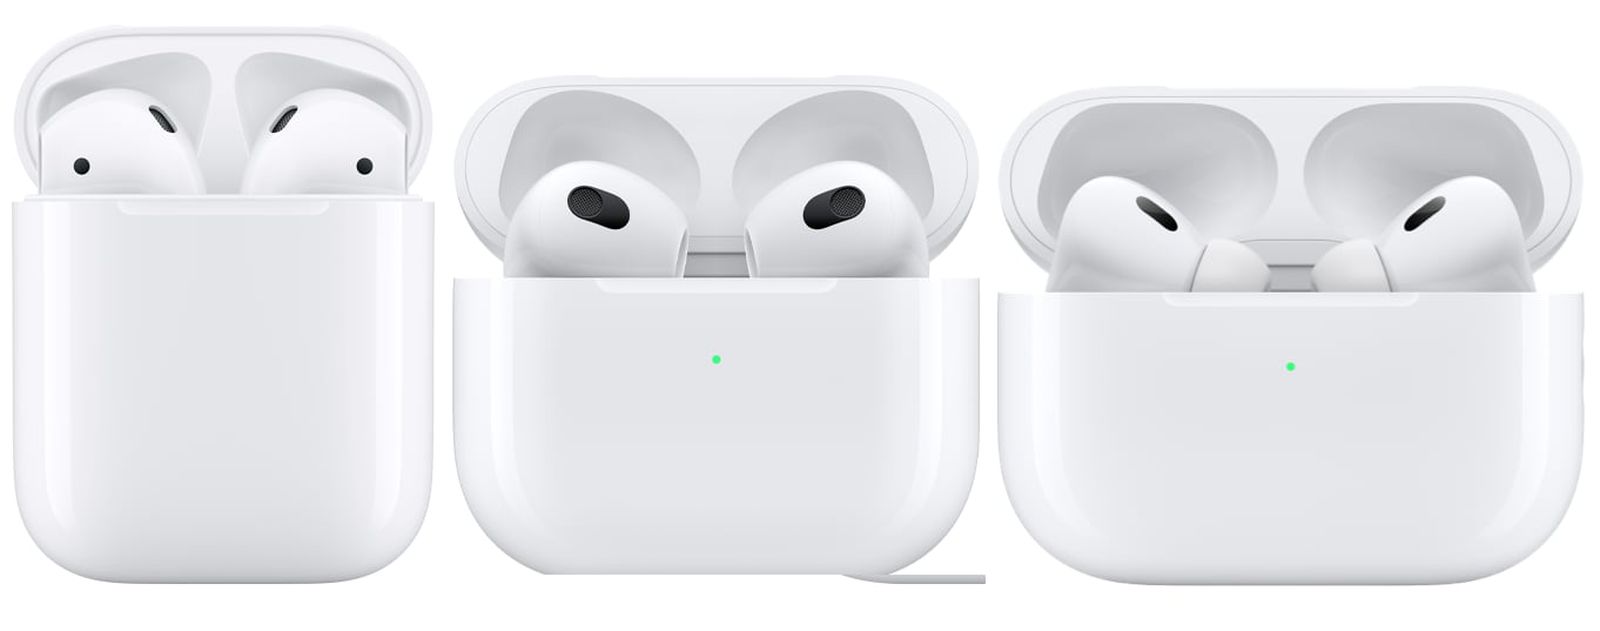 iOS 16 Alerts iPhone Users When Trying to Pair Counterfeit AirPods, But Doesn't ..